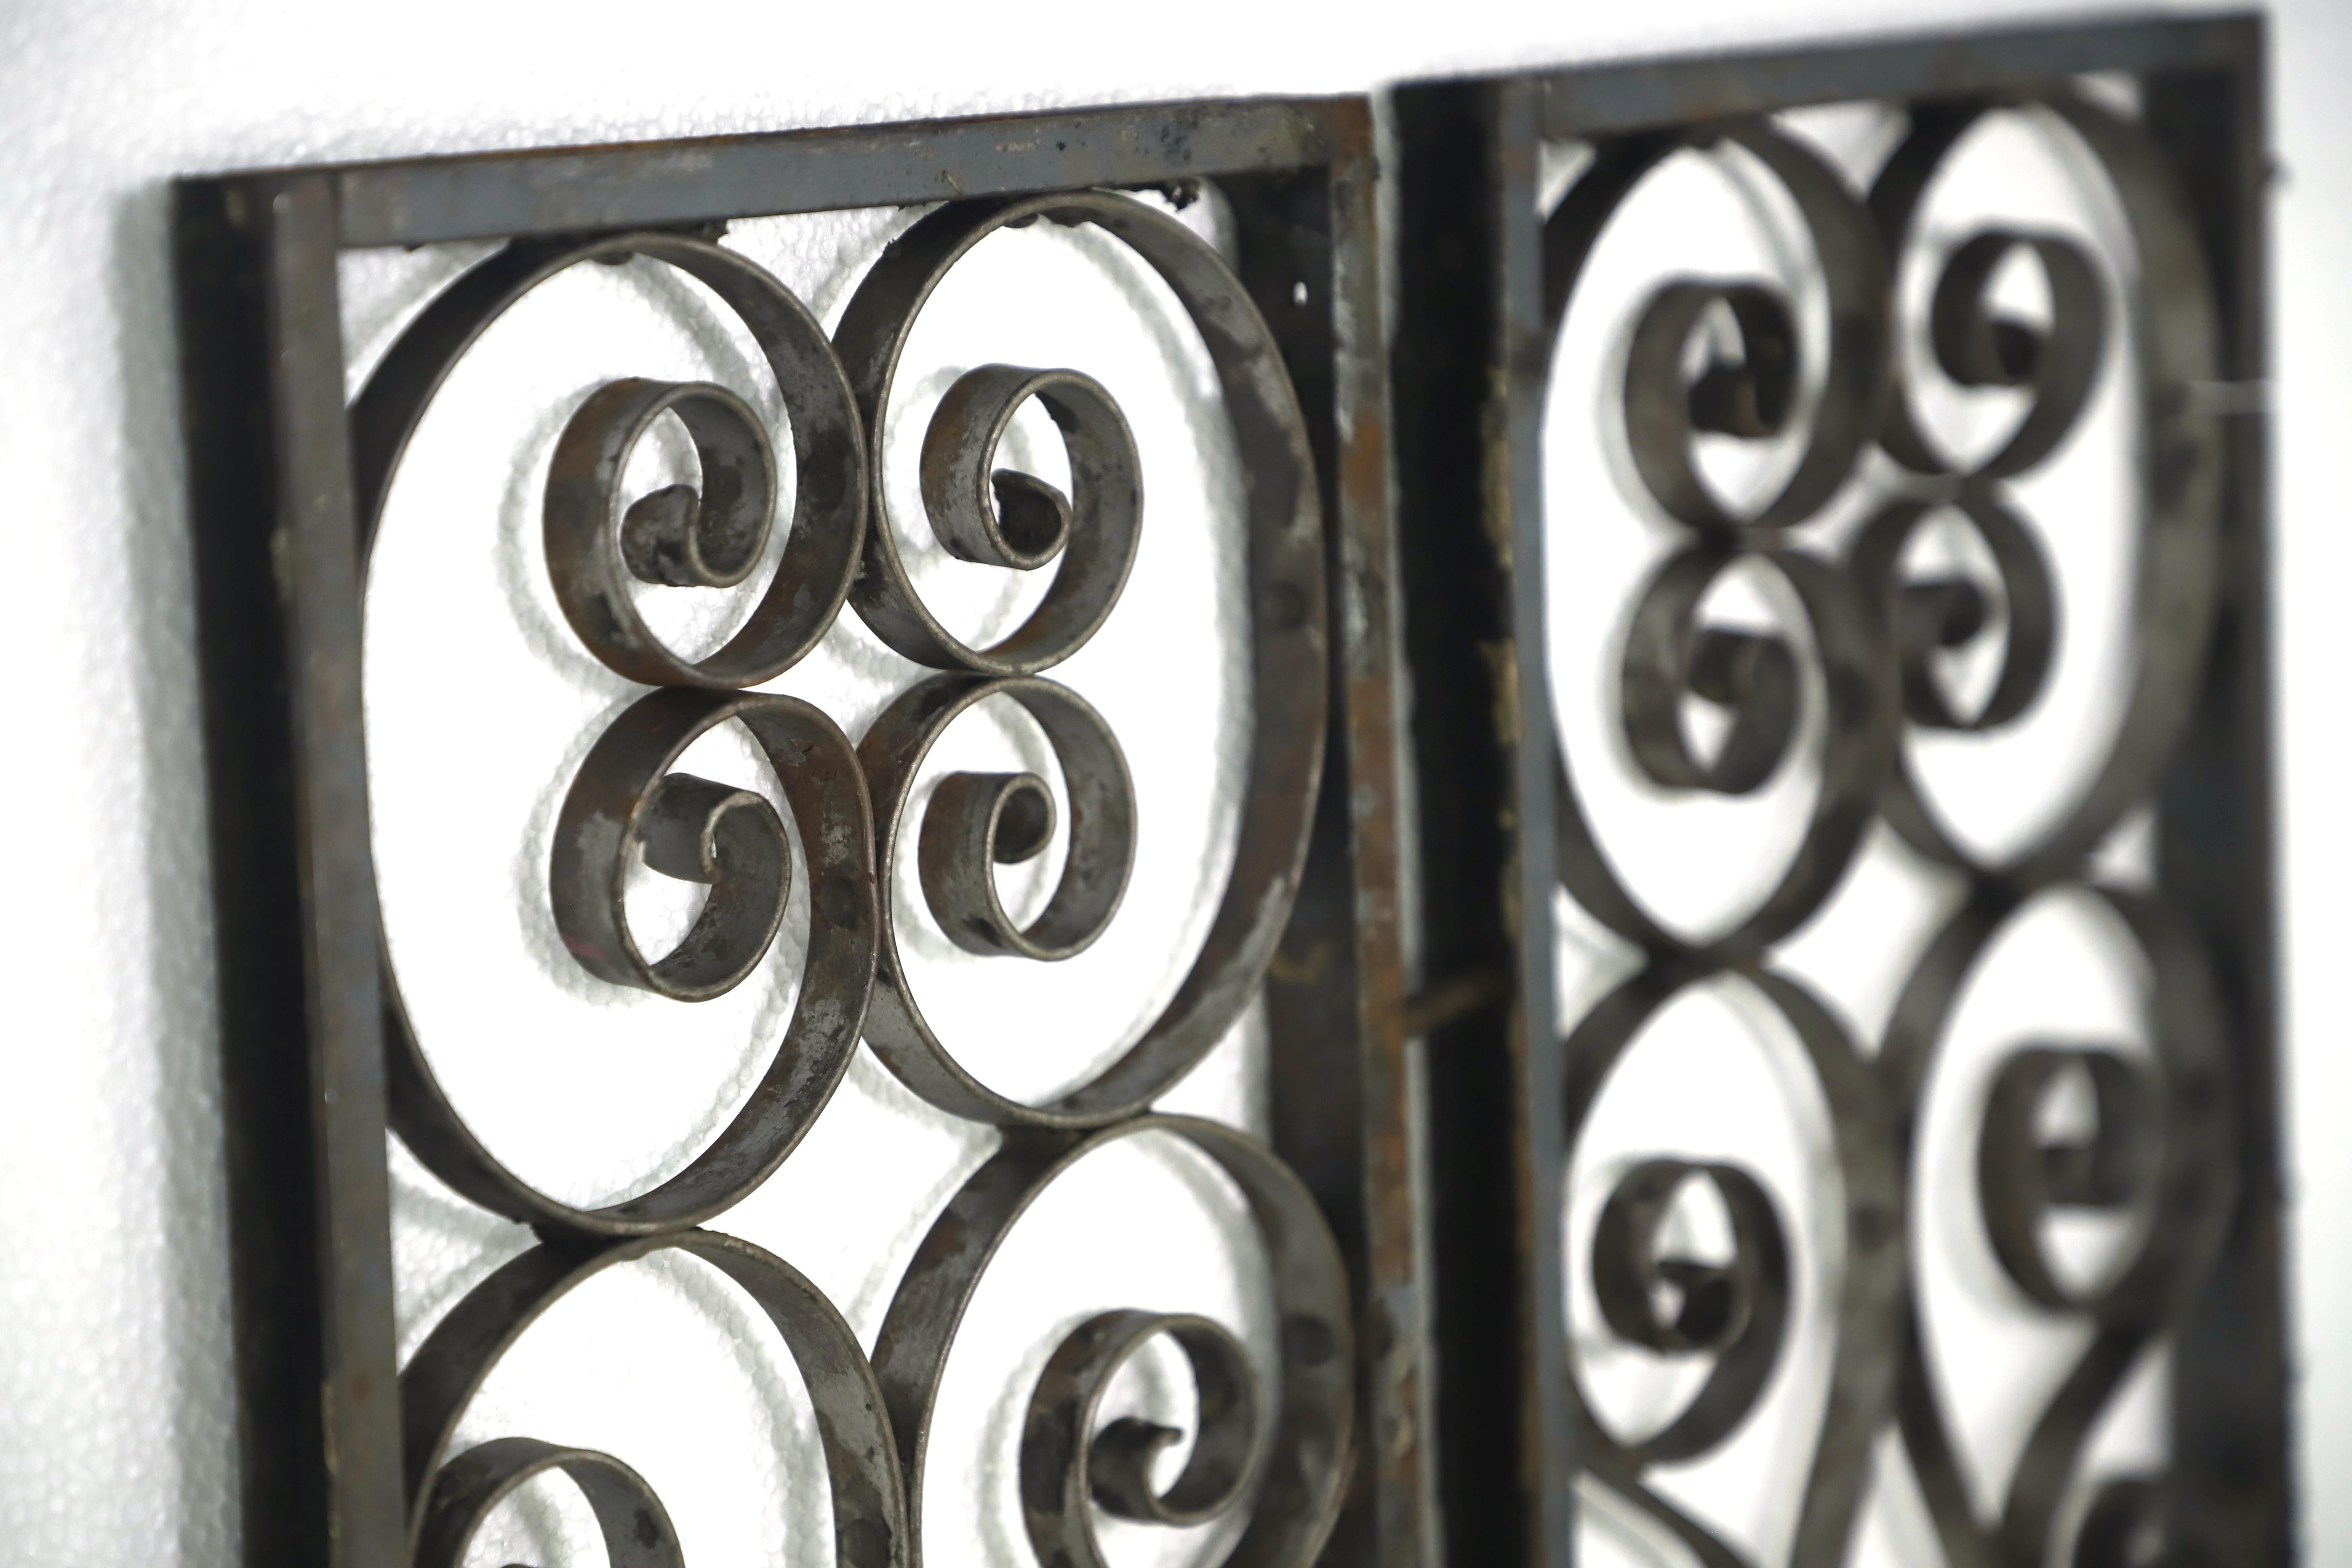 Black wrought iron curled and swirled panels in a steel frame. Clenched + pinned construction shows their age. Priced as a pair. Please note, this item is located in one of our NYC locations.